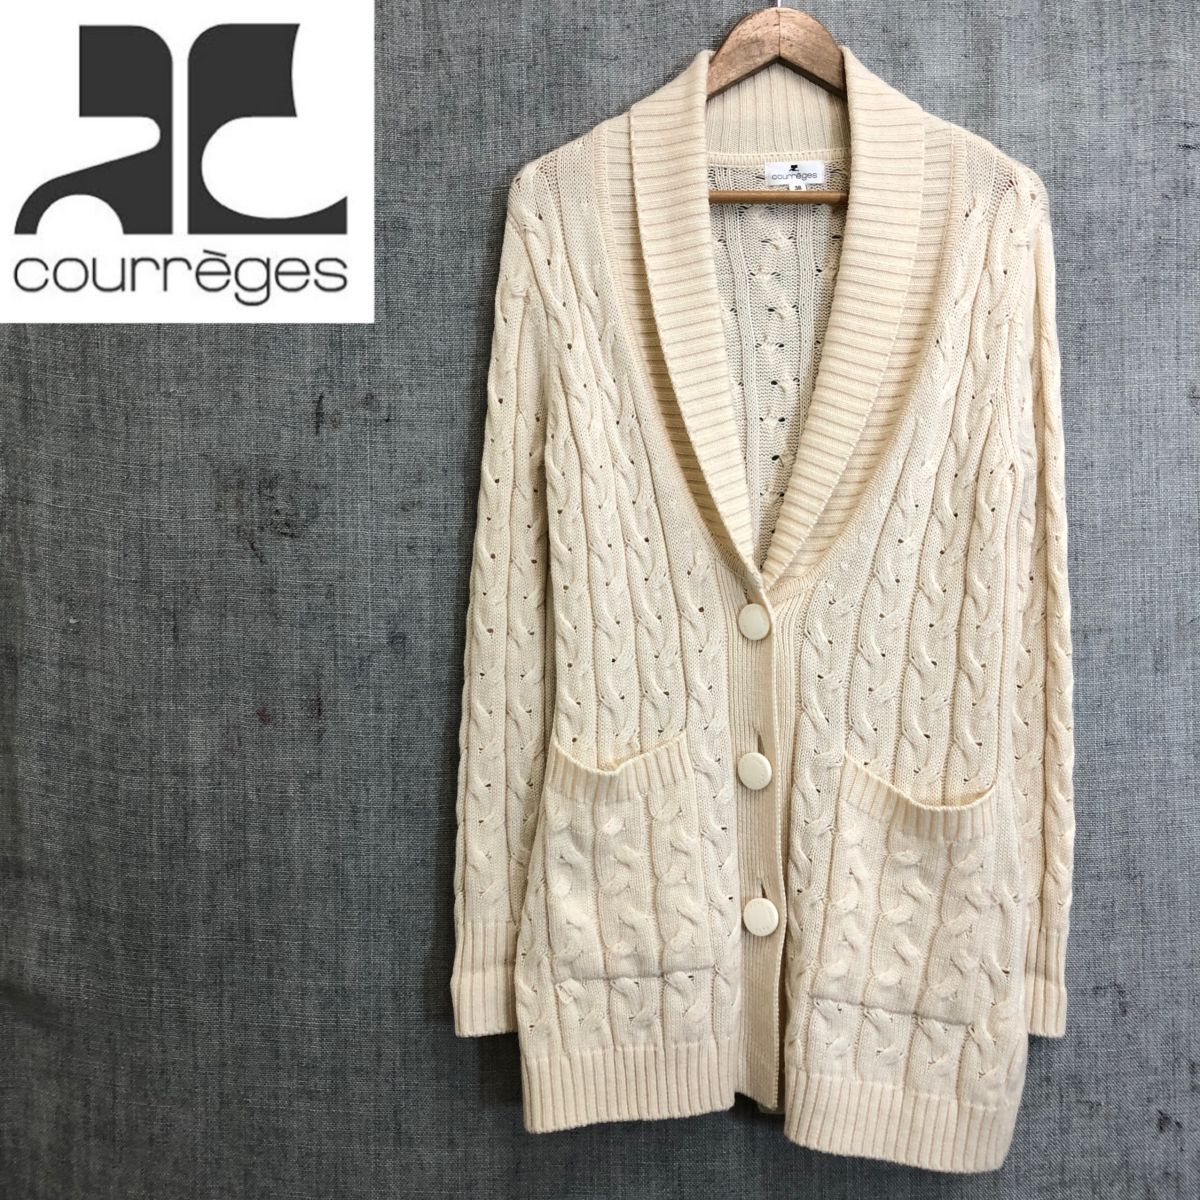 M1793-F* courreges Courreges cardigan knitted sweater 3B * size38 wool acrylic fiber white old clothes lady's spring 